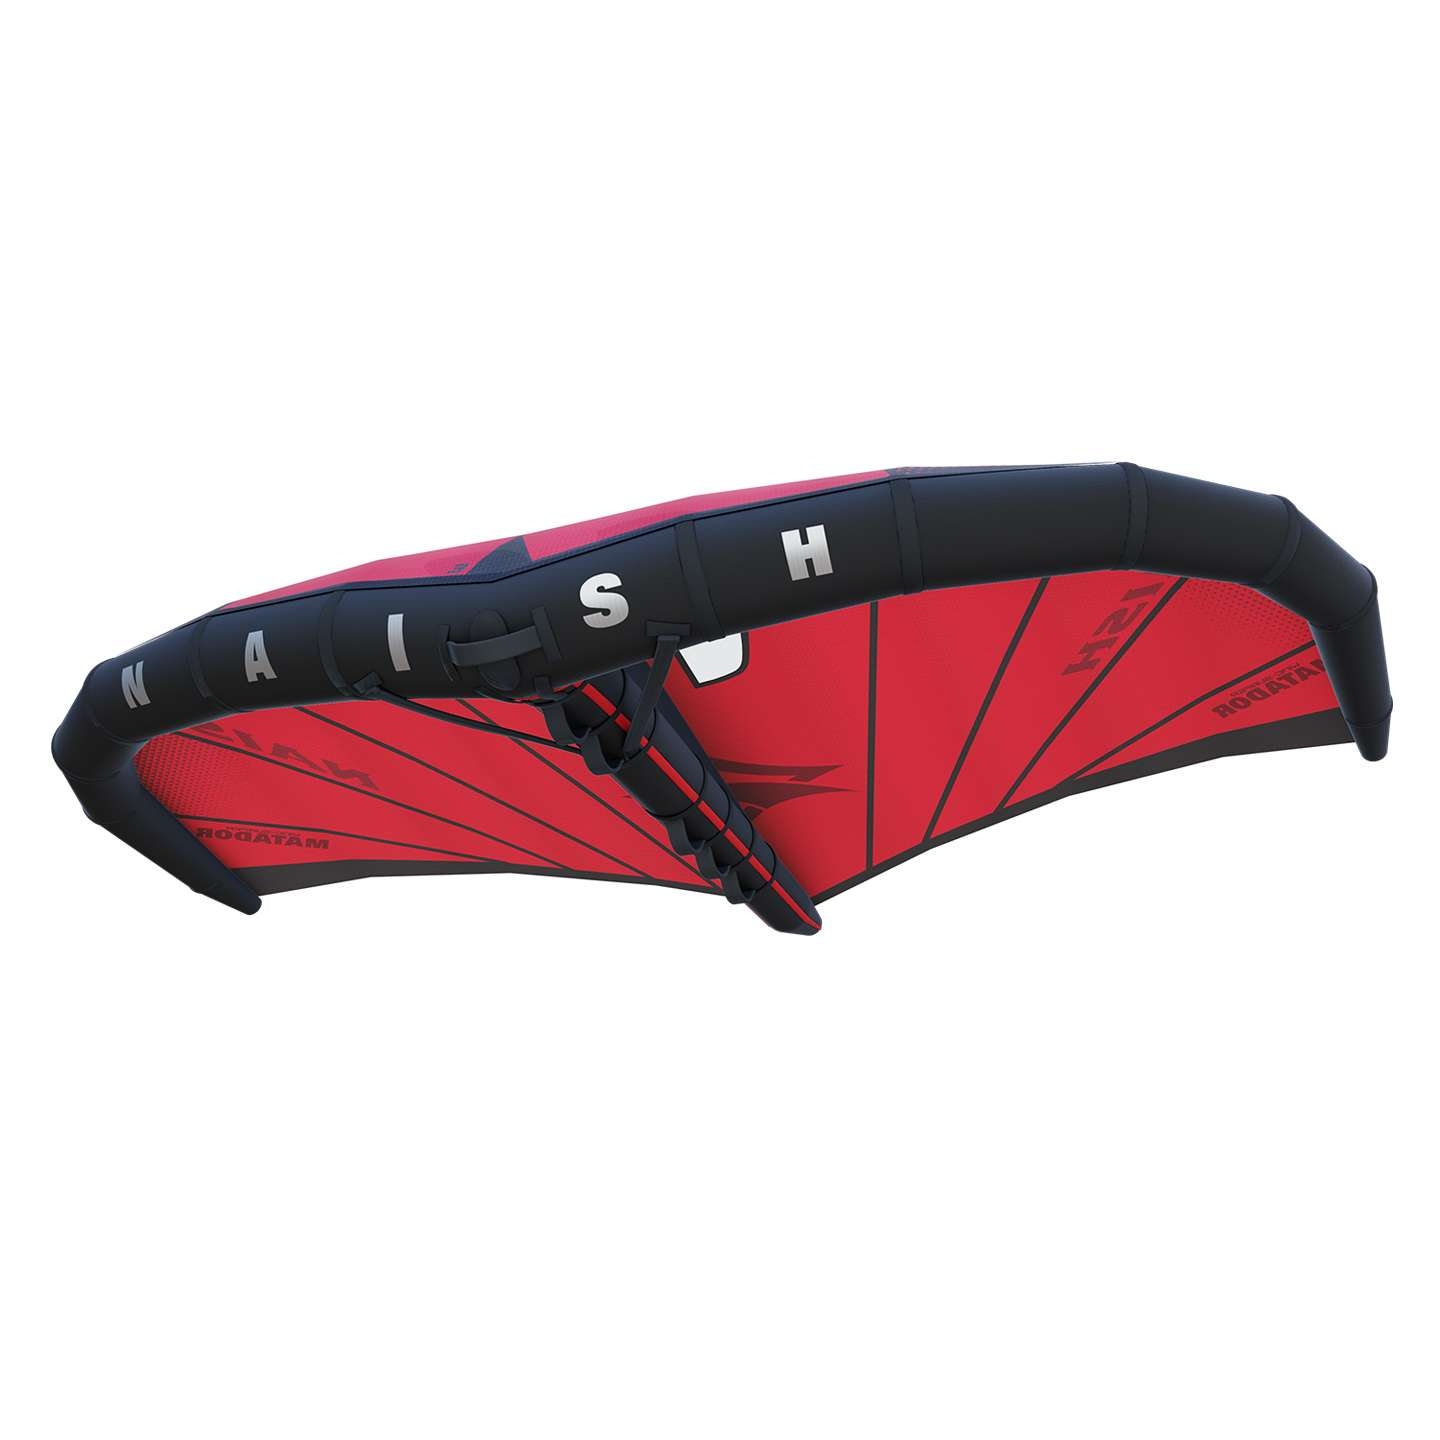 Naish S26 Wing Surfer Matador – 4 Metre – Red – The Foiling Collective